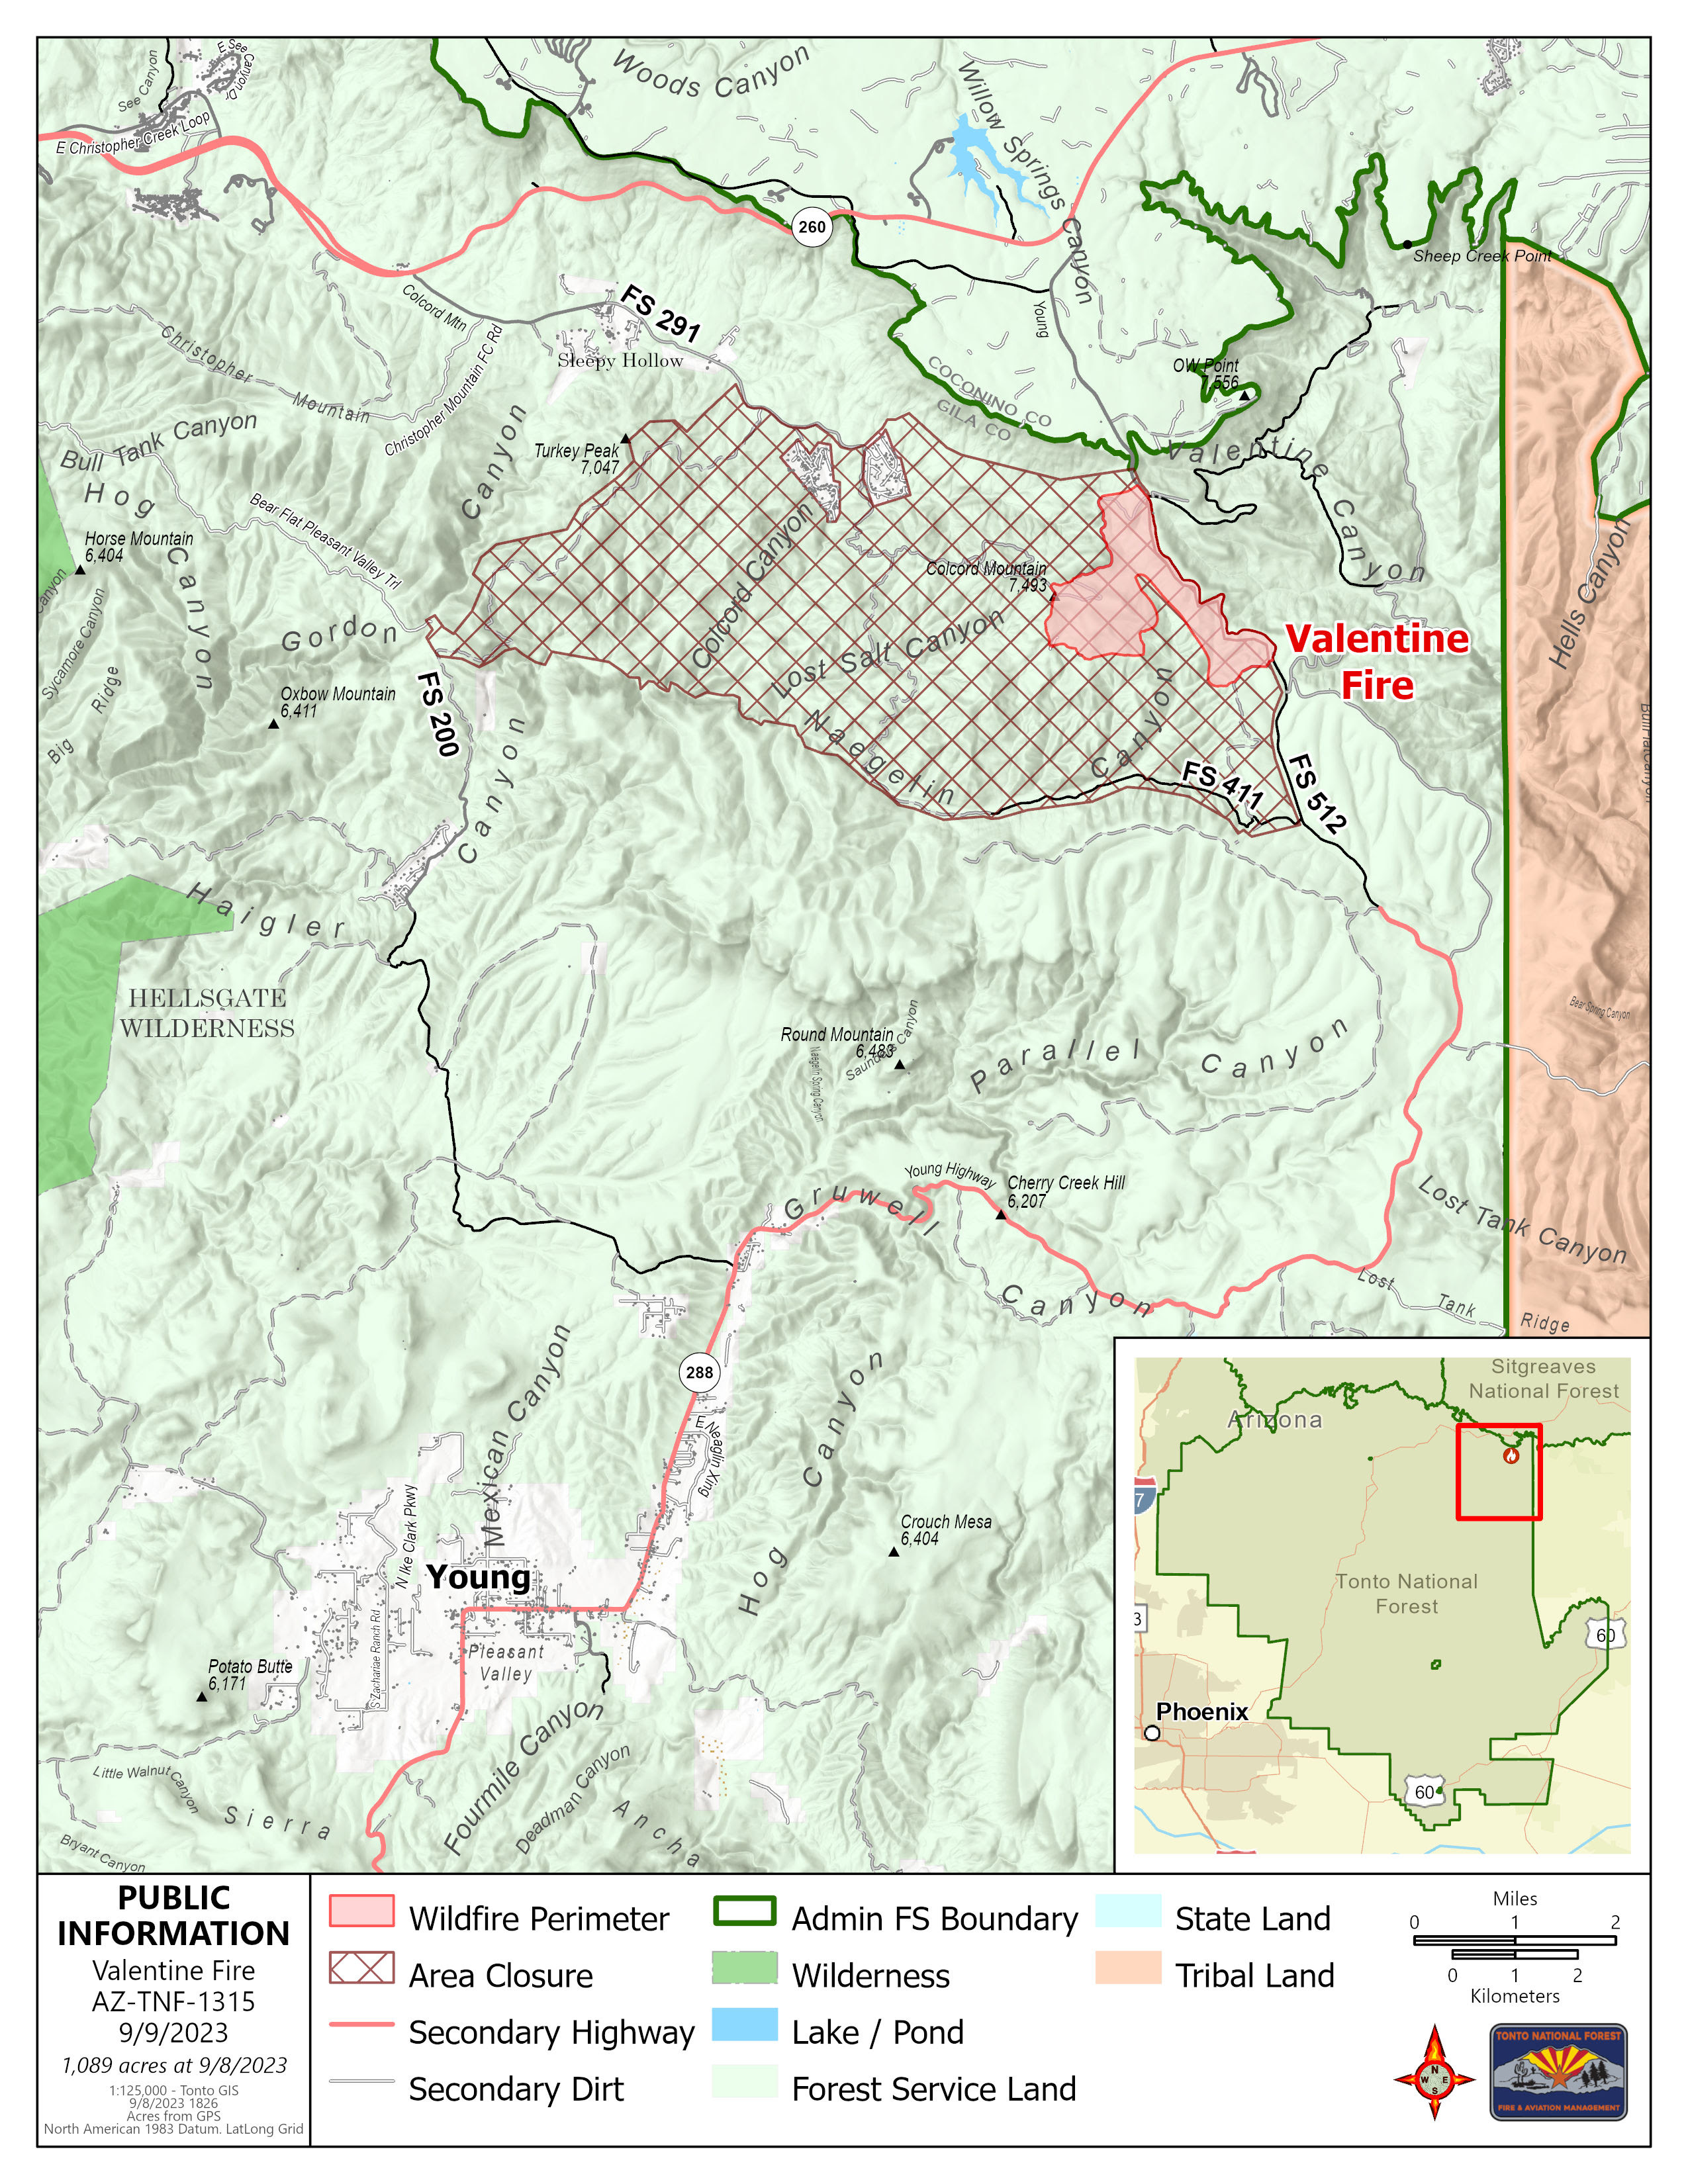 A map of the Valentine fire September 9 2023